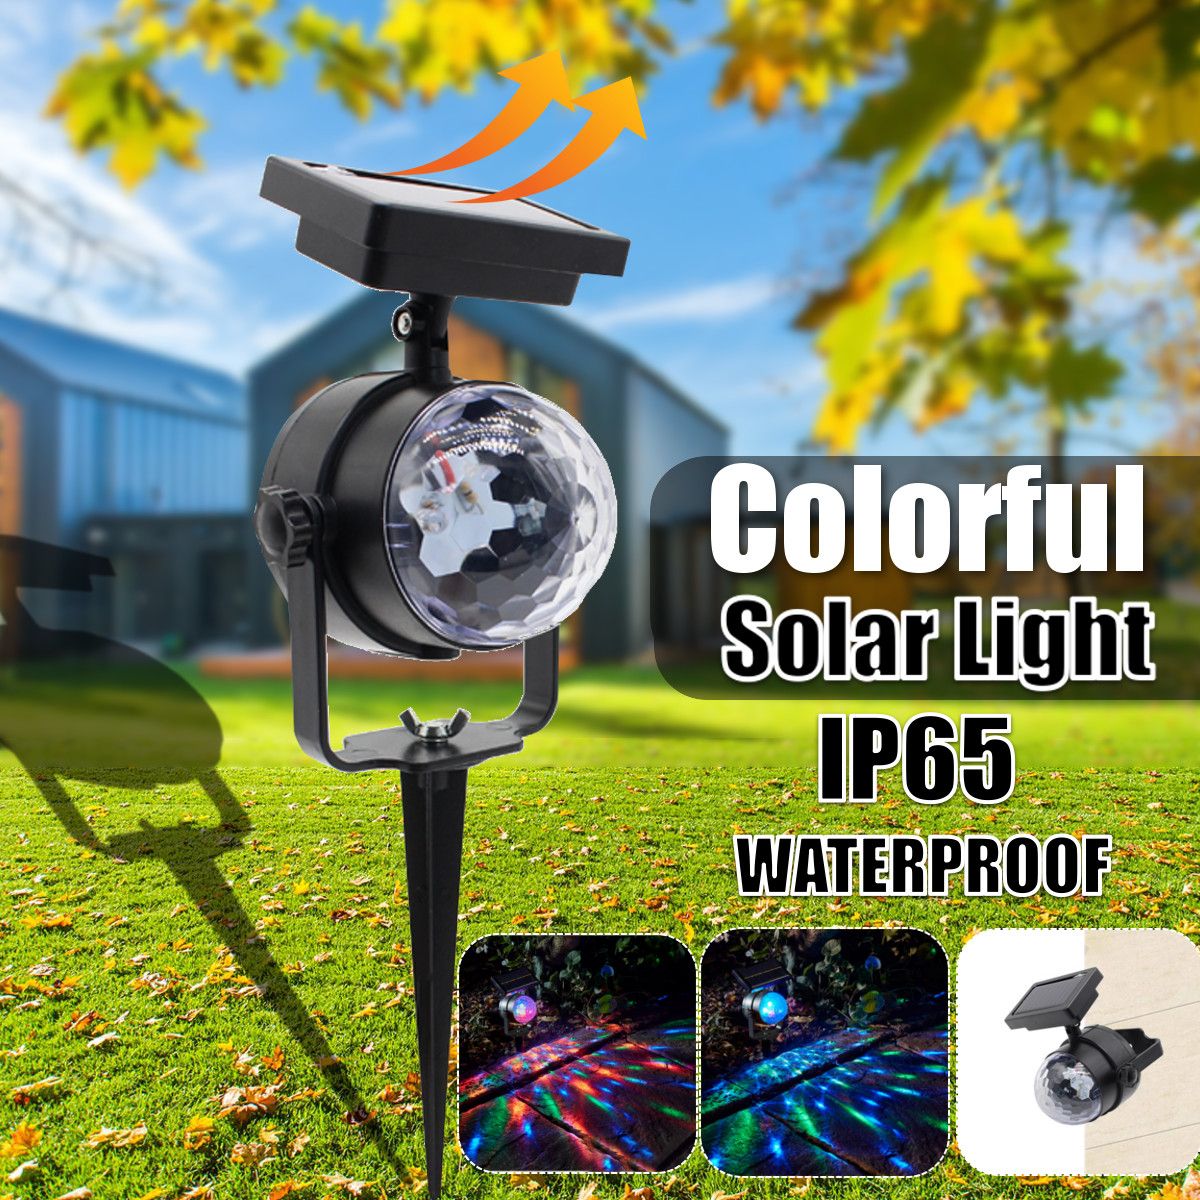 Solar-Powered-Rotating-LED-Projection-Light-Colorful-Garden-Lawn-Lamp-Waterproof-Outdoor-Lighting-1708558